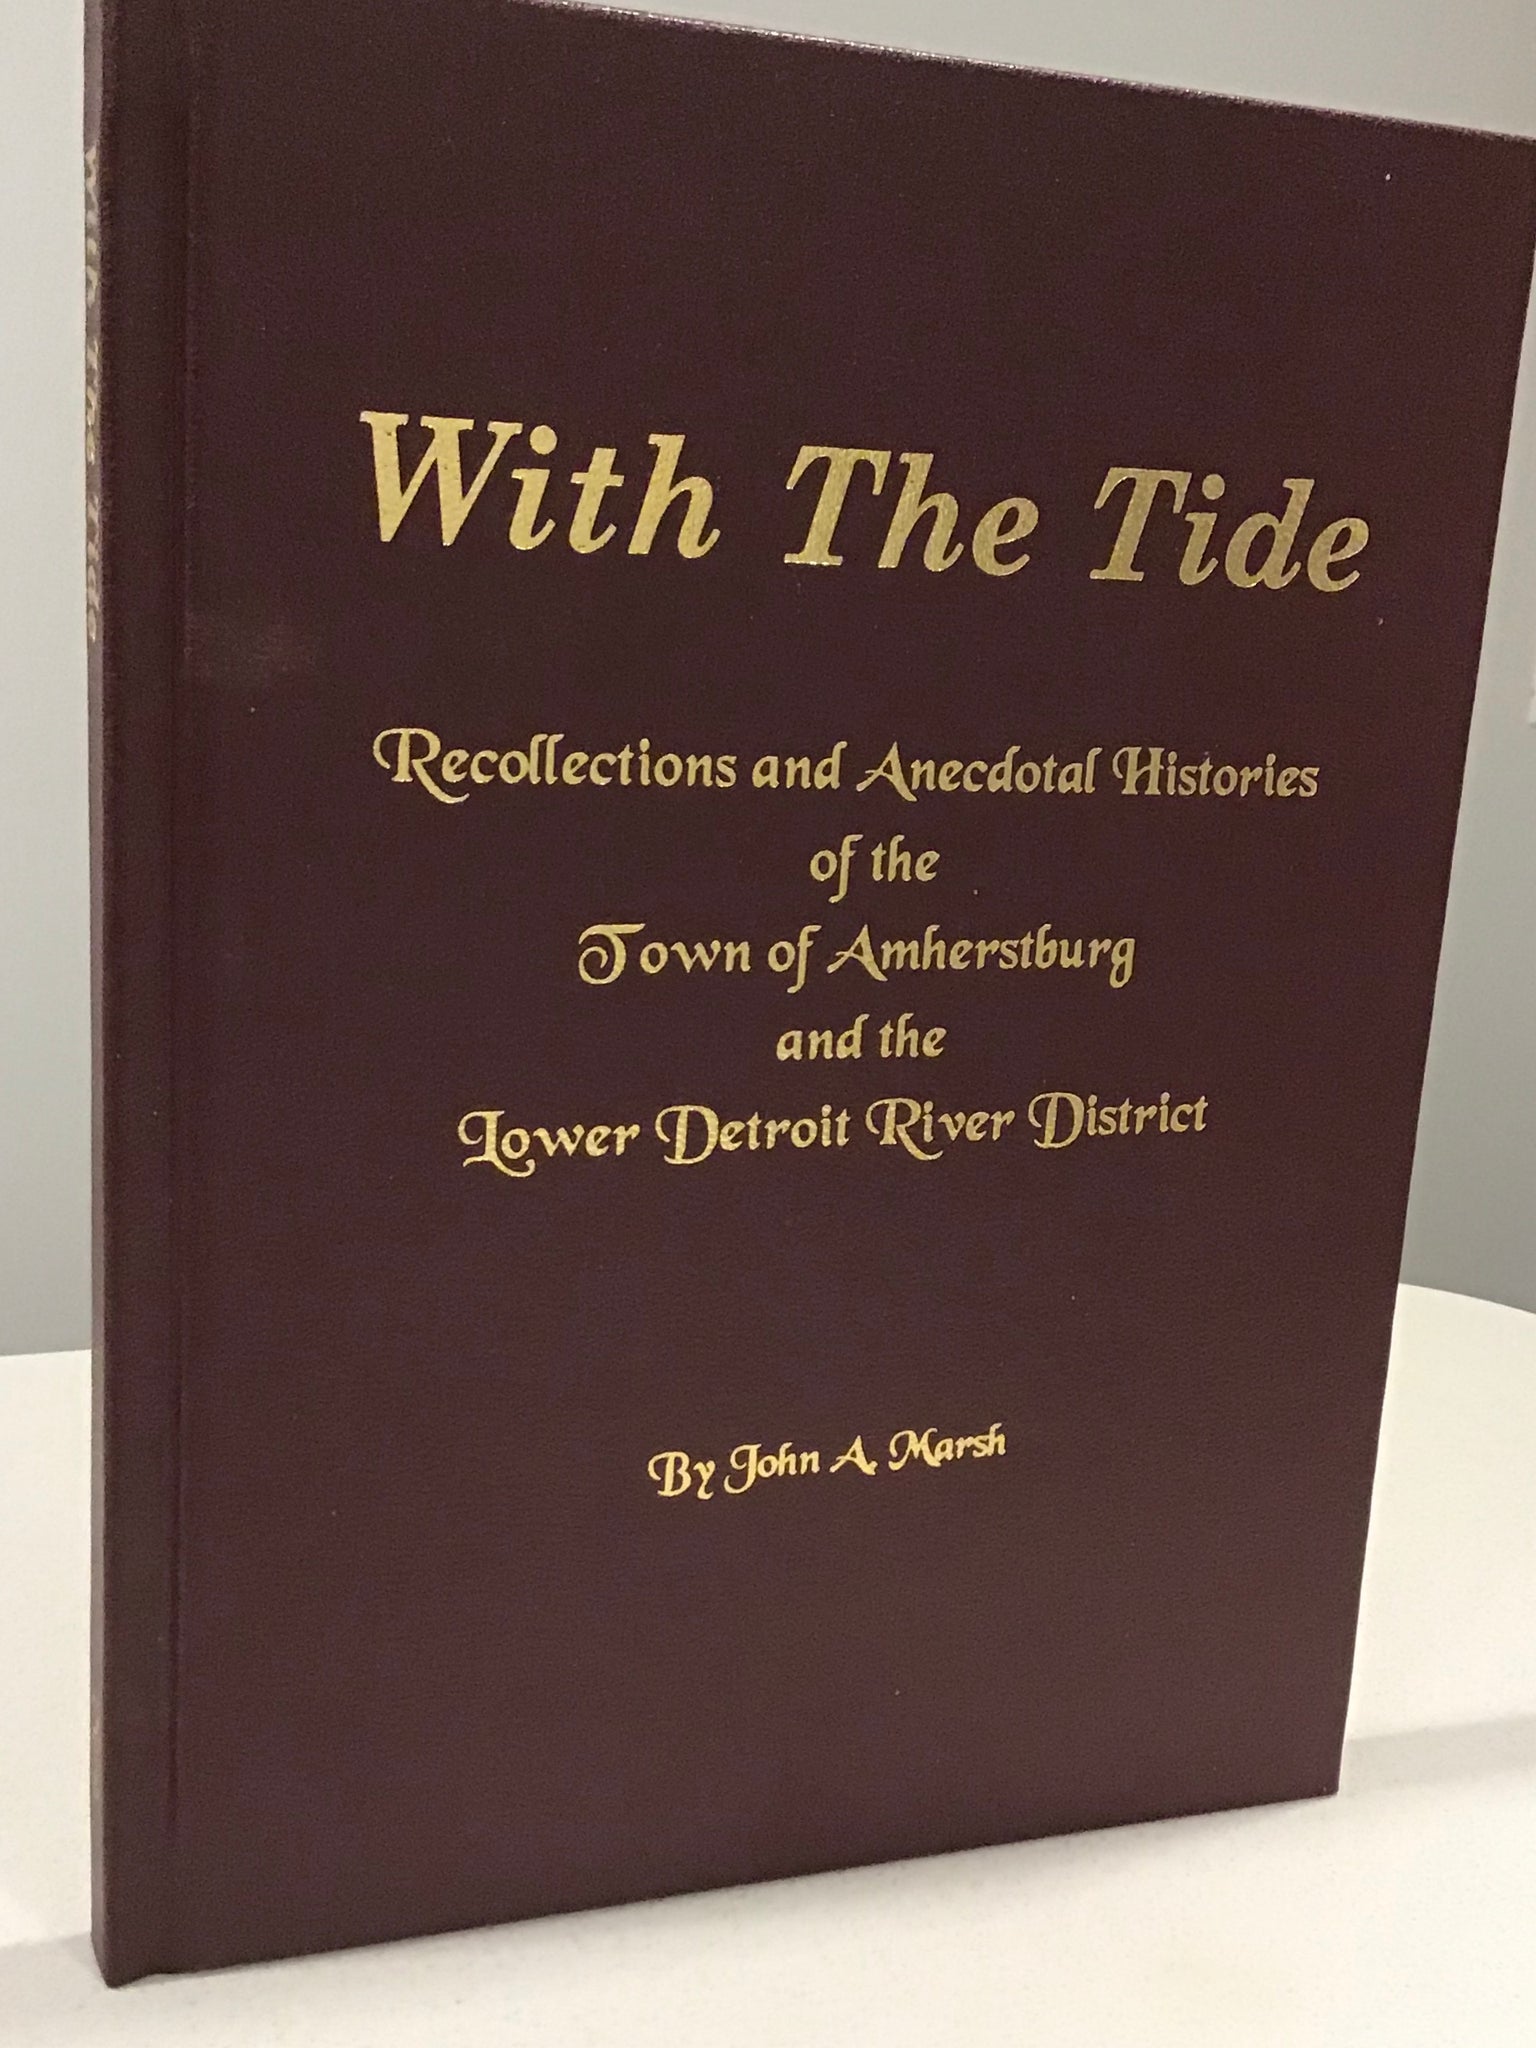 With the Tide; Recollections and the Anecdotal Histories of the Town of Amherstburg and the Lower Detroit River District